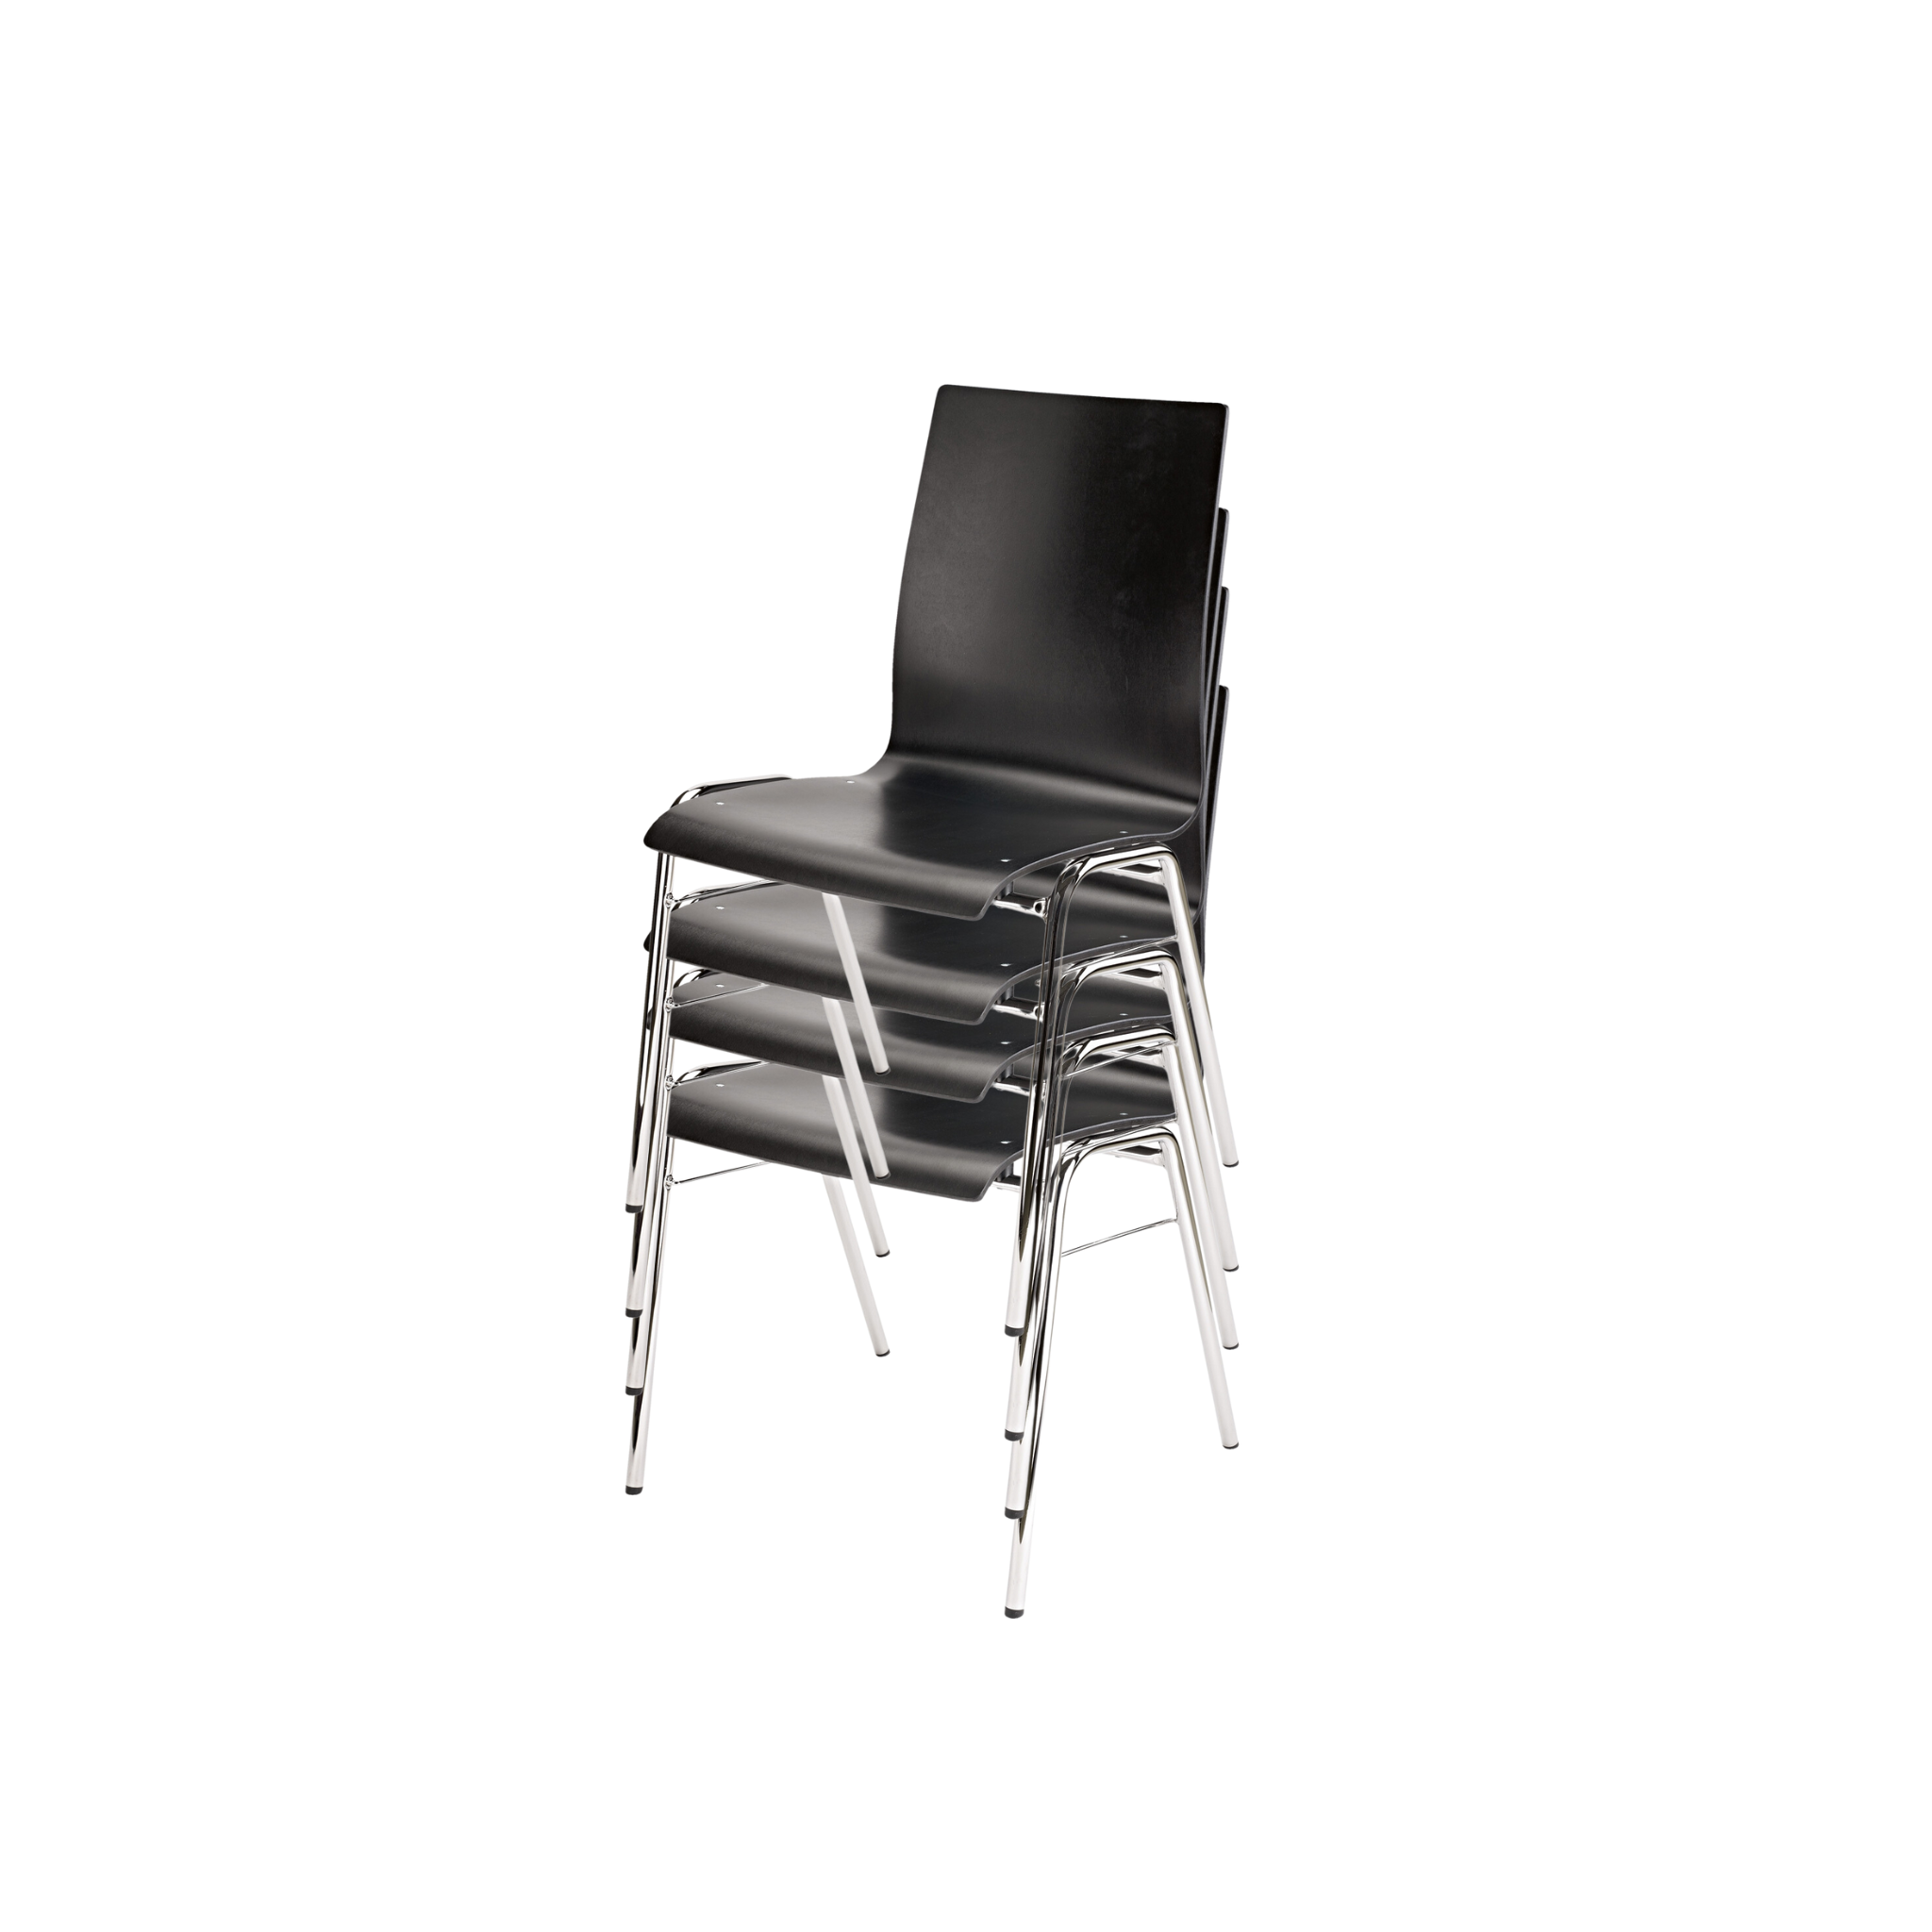 Stacking chair set of 4 - 0